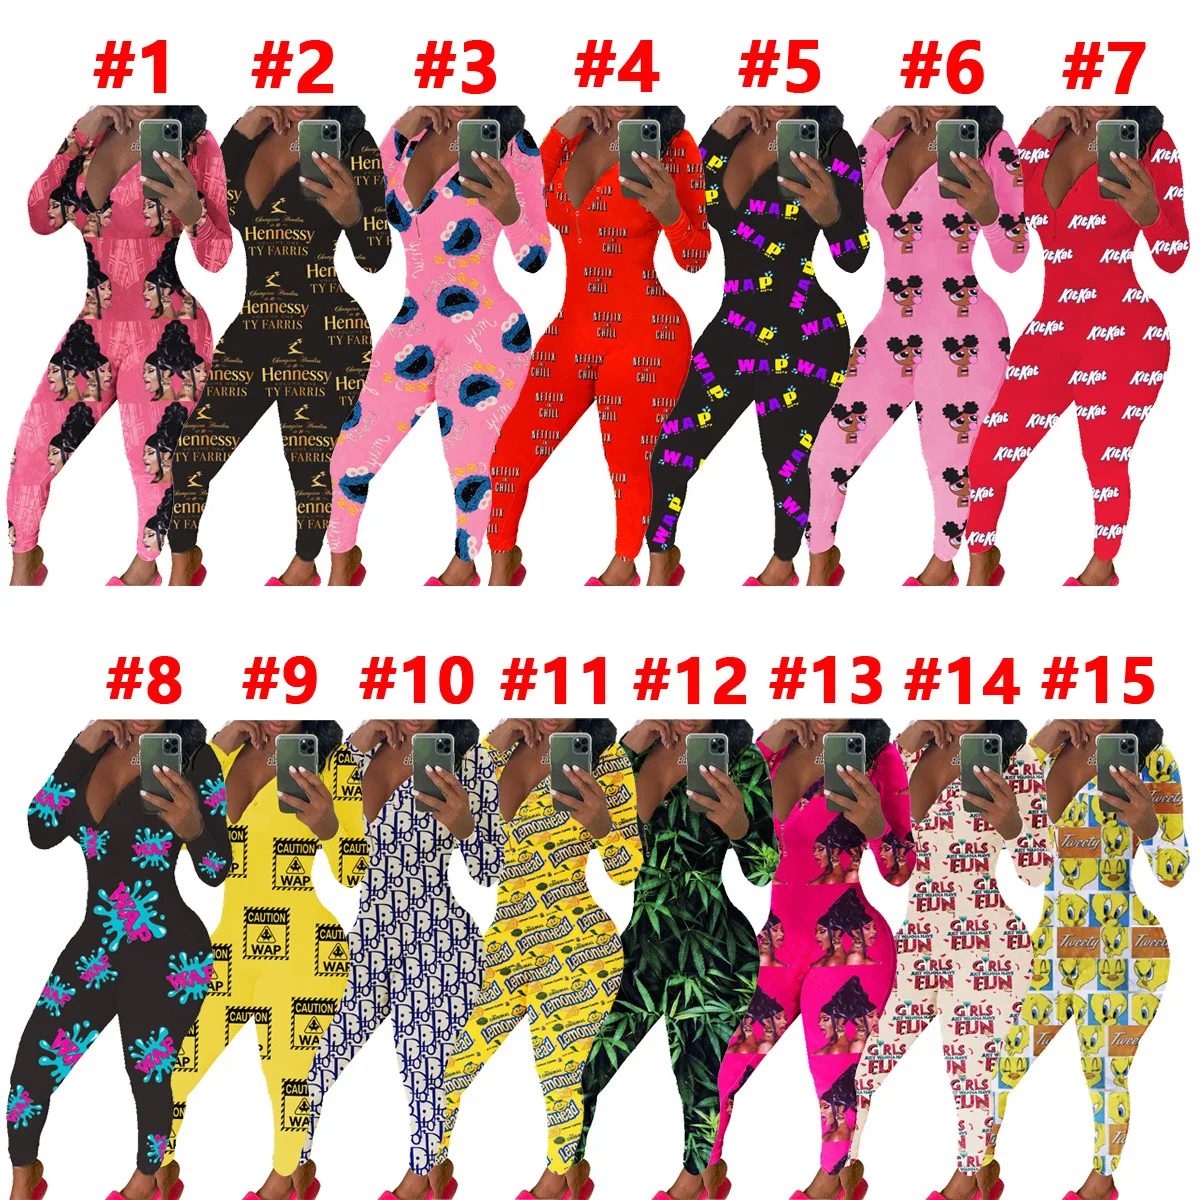 

New style candy and snack label printed onesie pajamas leisure wear women jumpsuit wap kat kit backwods, Picture shows